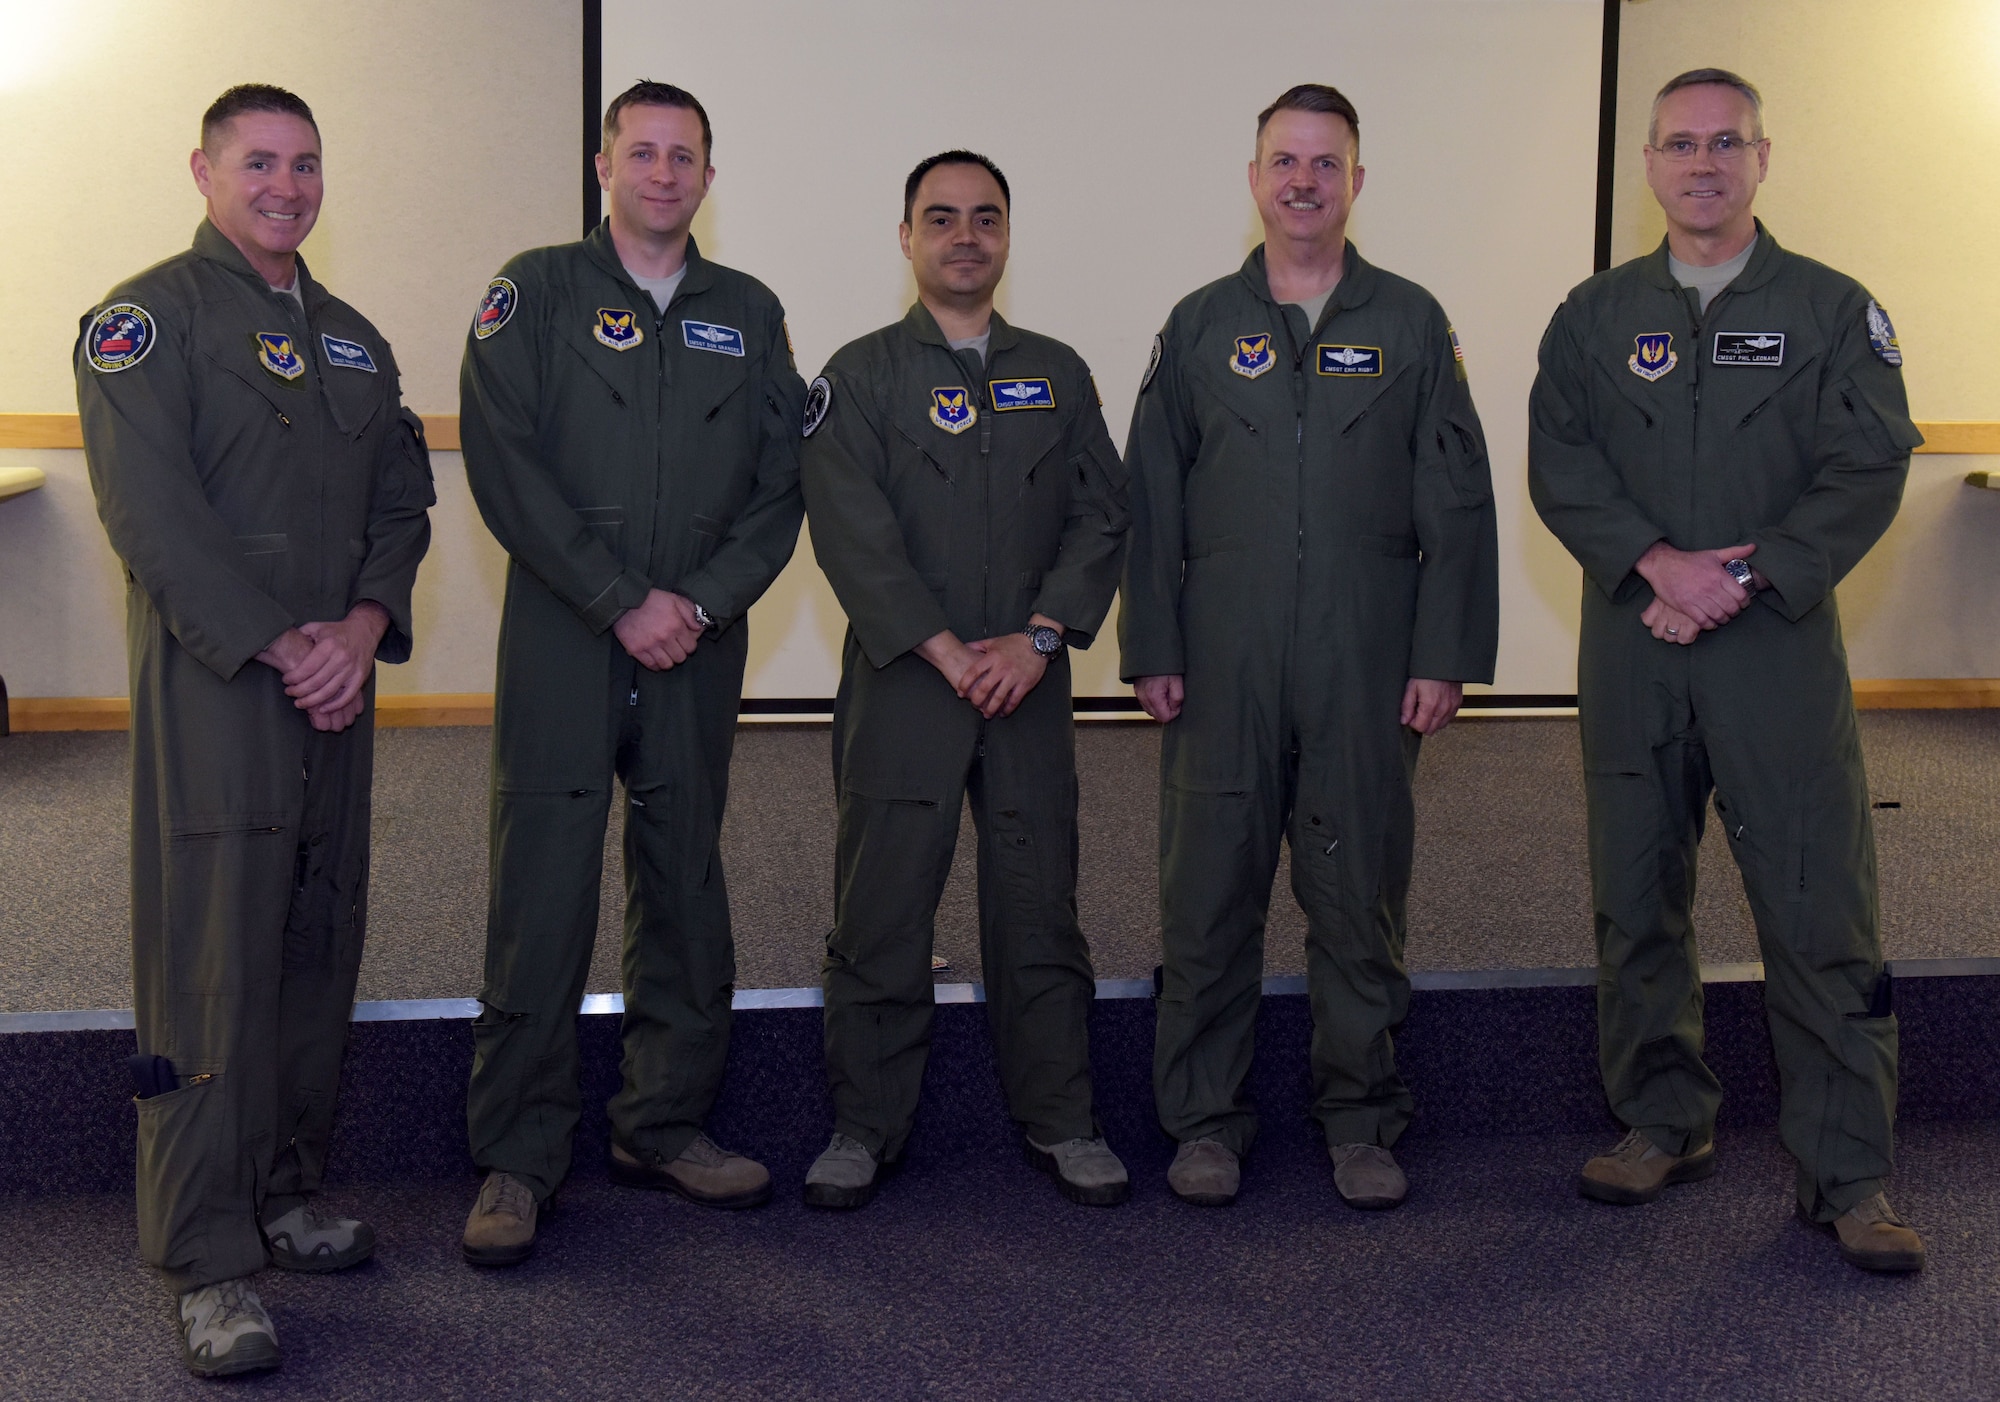 Senior enlisted leaders from the career enlisted aviator career field pose for a photograph during their roadshow at RAF Mildenhall, England, Feb. 8, 2018. The briefings discussed CEA retention issues, incentive programs and cross-training opportunities for Airmen interested in the CEA career fields.  (U.S. Air Force photo by Senior Airman Alexandra West)